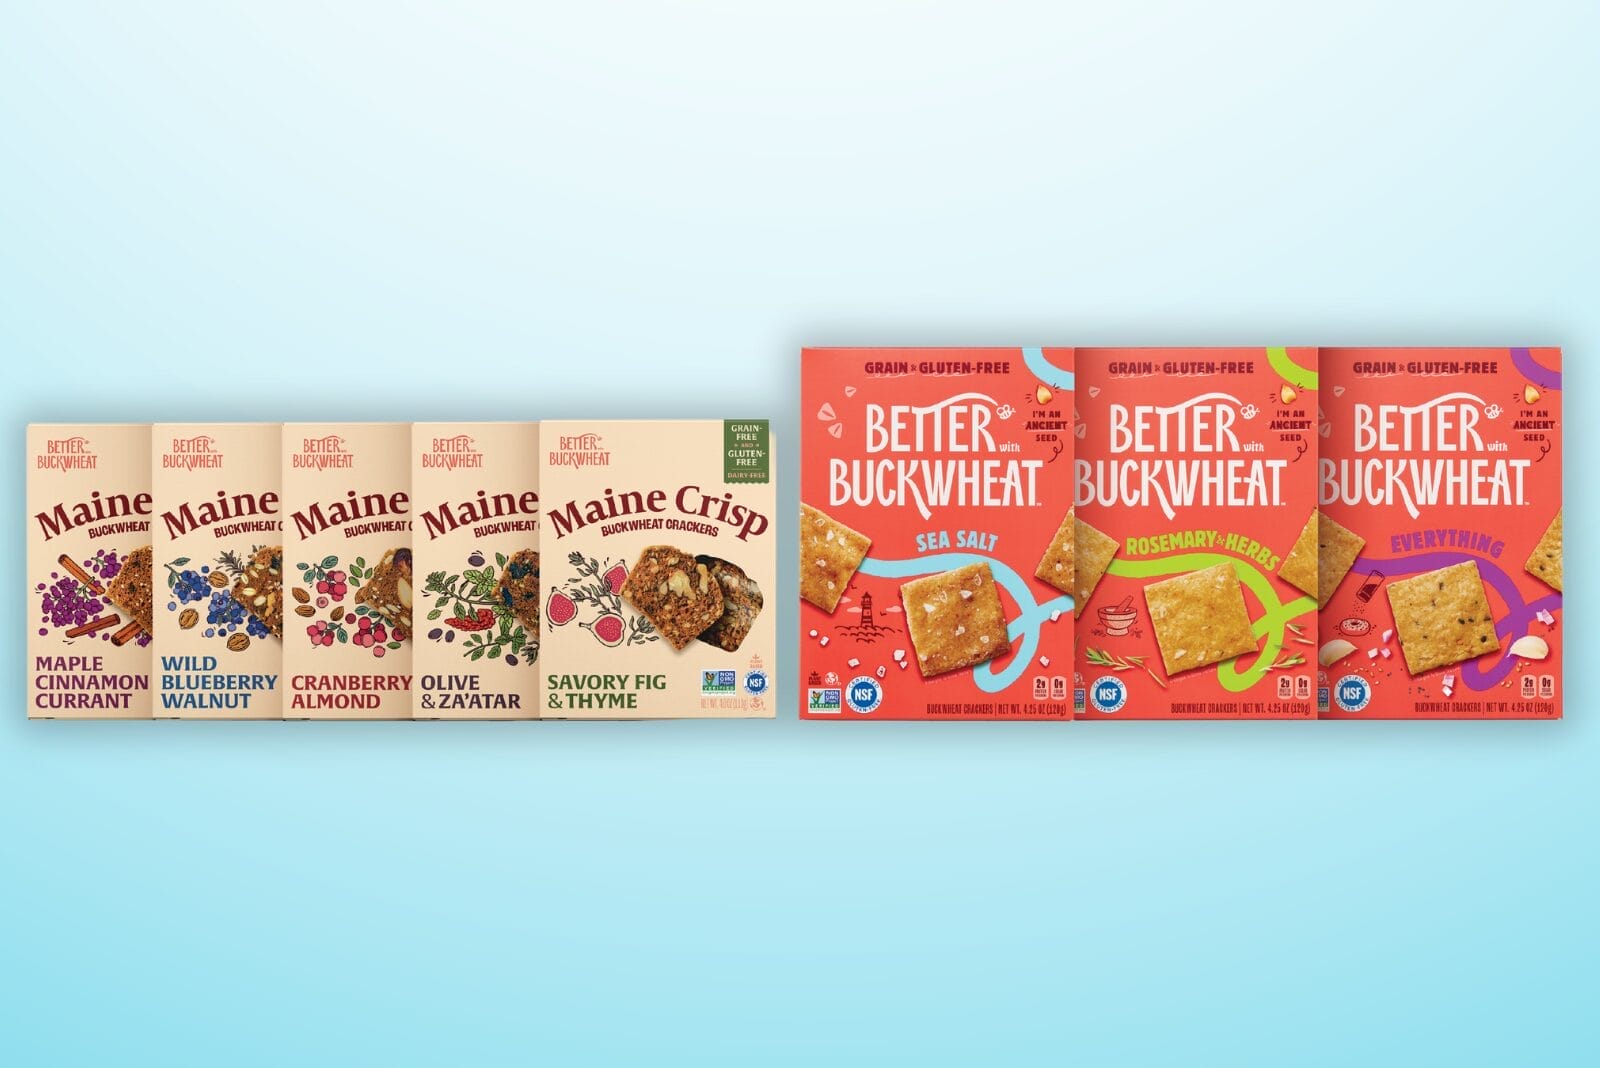 Boxes of Maine Crisps and Better With Buckwheat crackers on gradient background.